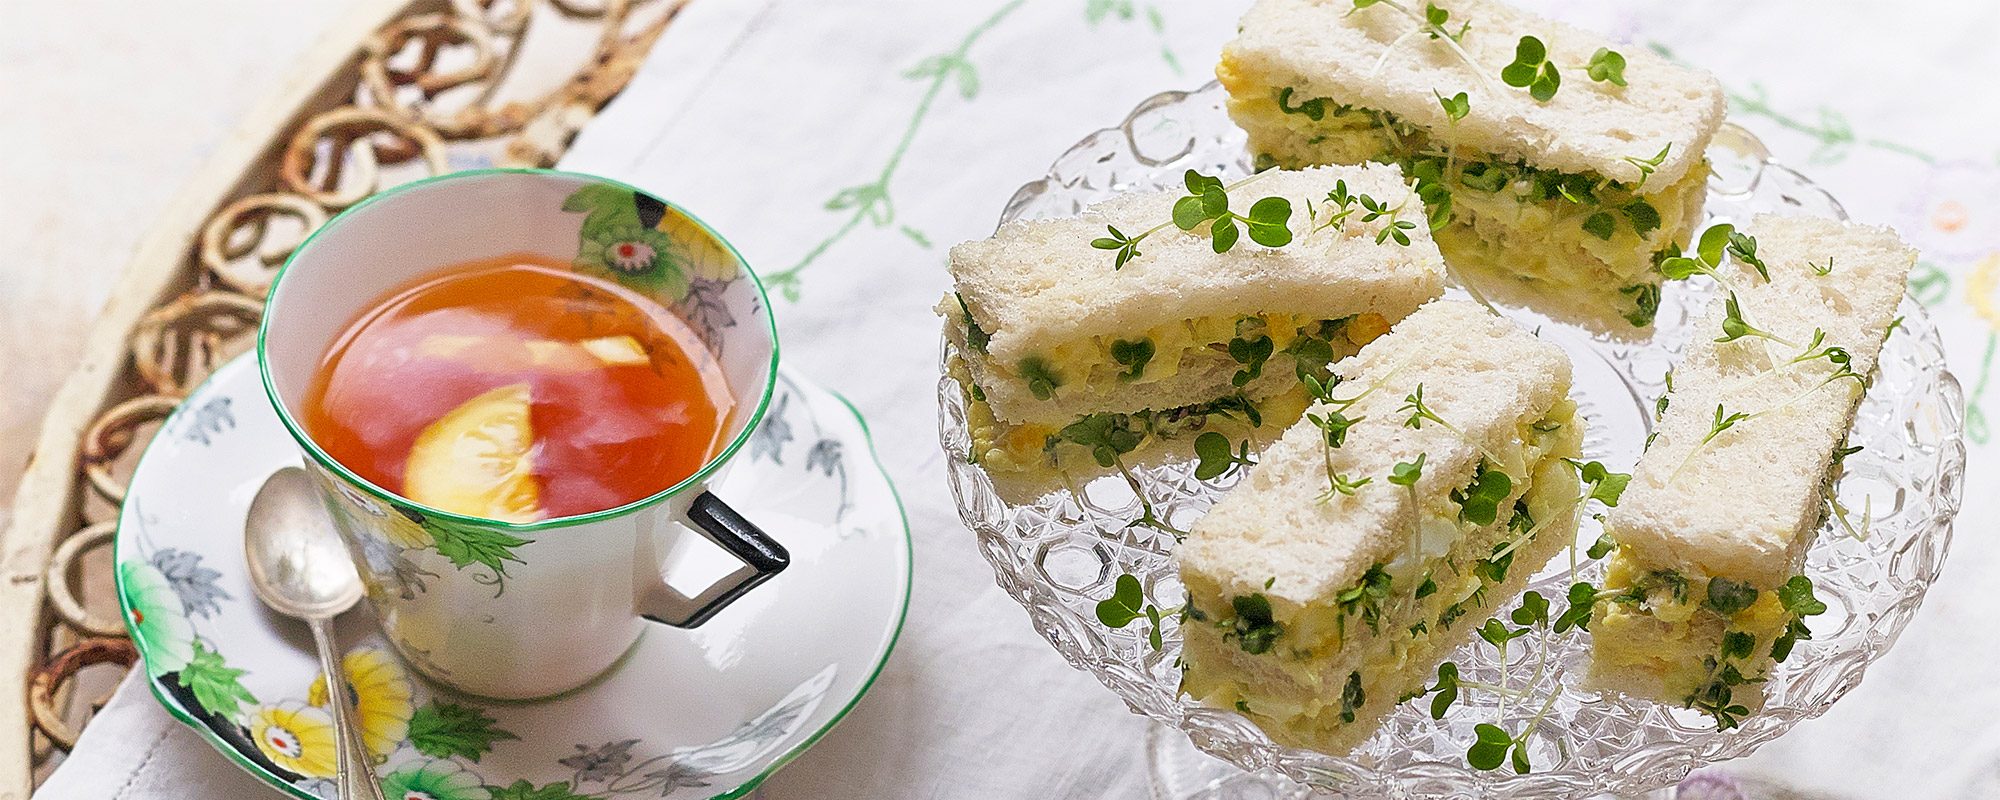 Egg and Salad Cress Afternoon Tea Sandwiches